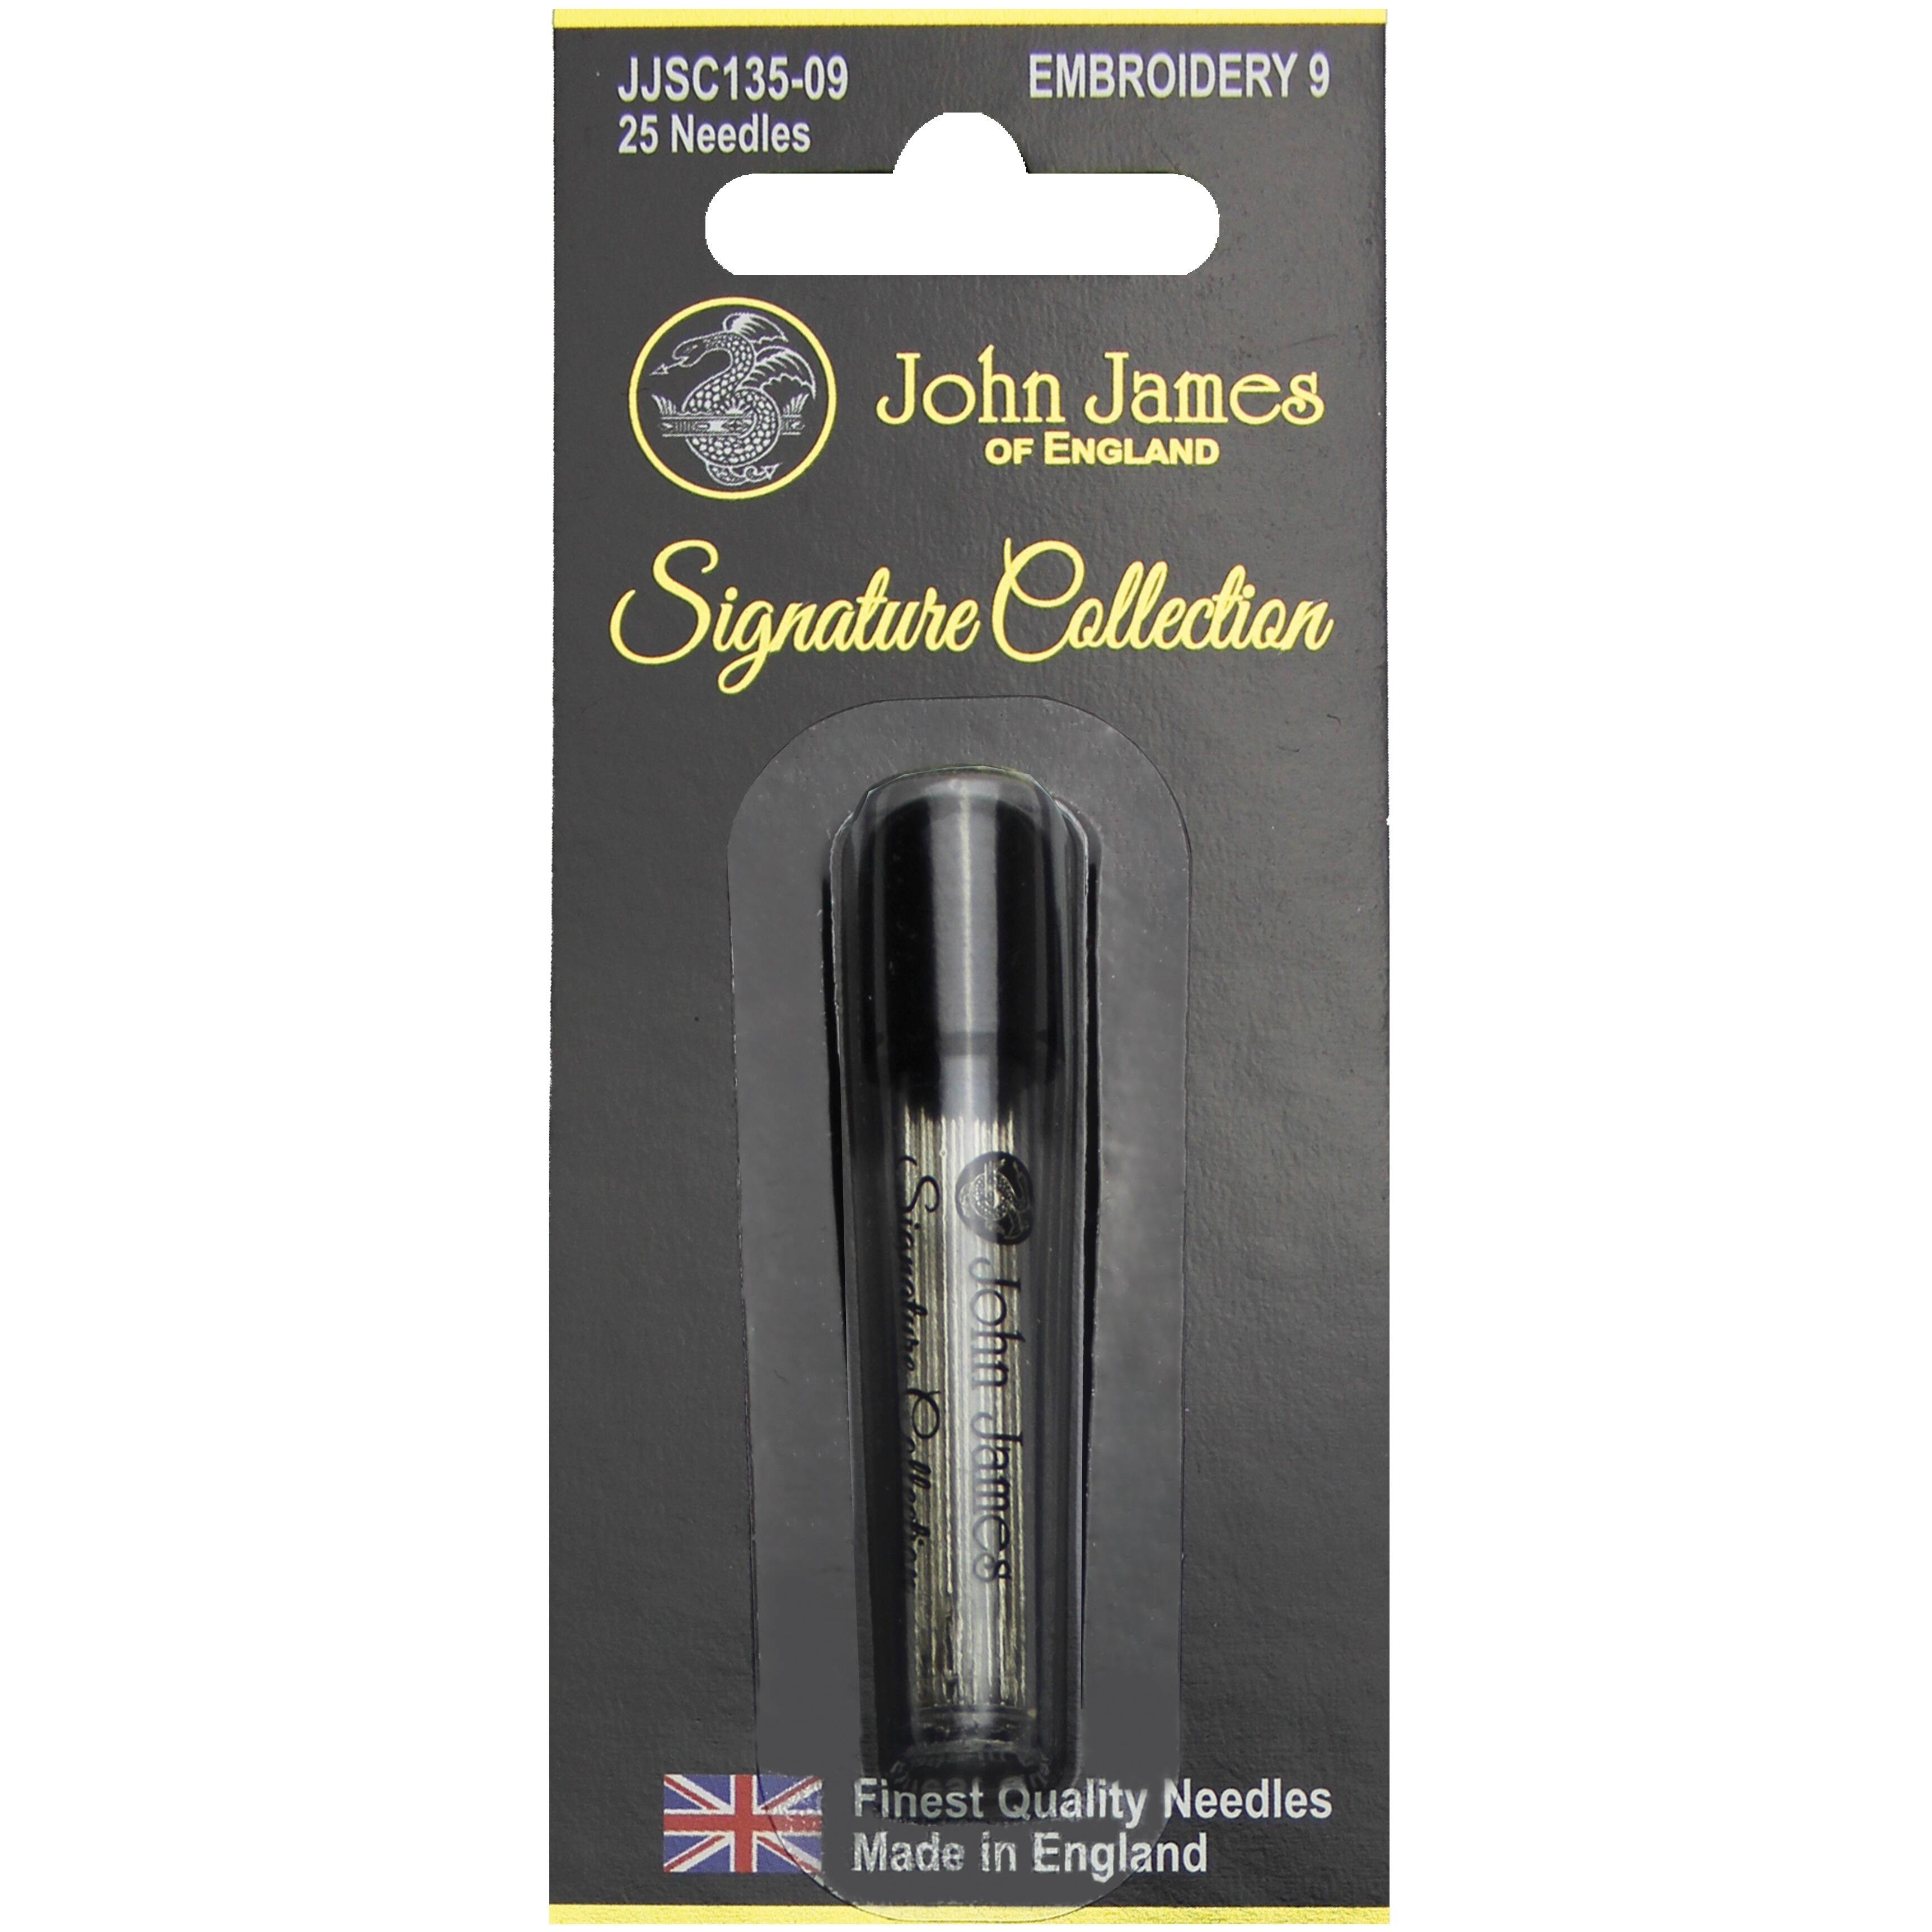 John James Signature Collection Embroidery Needles